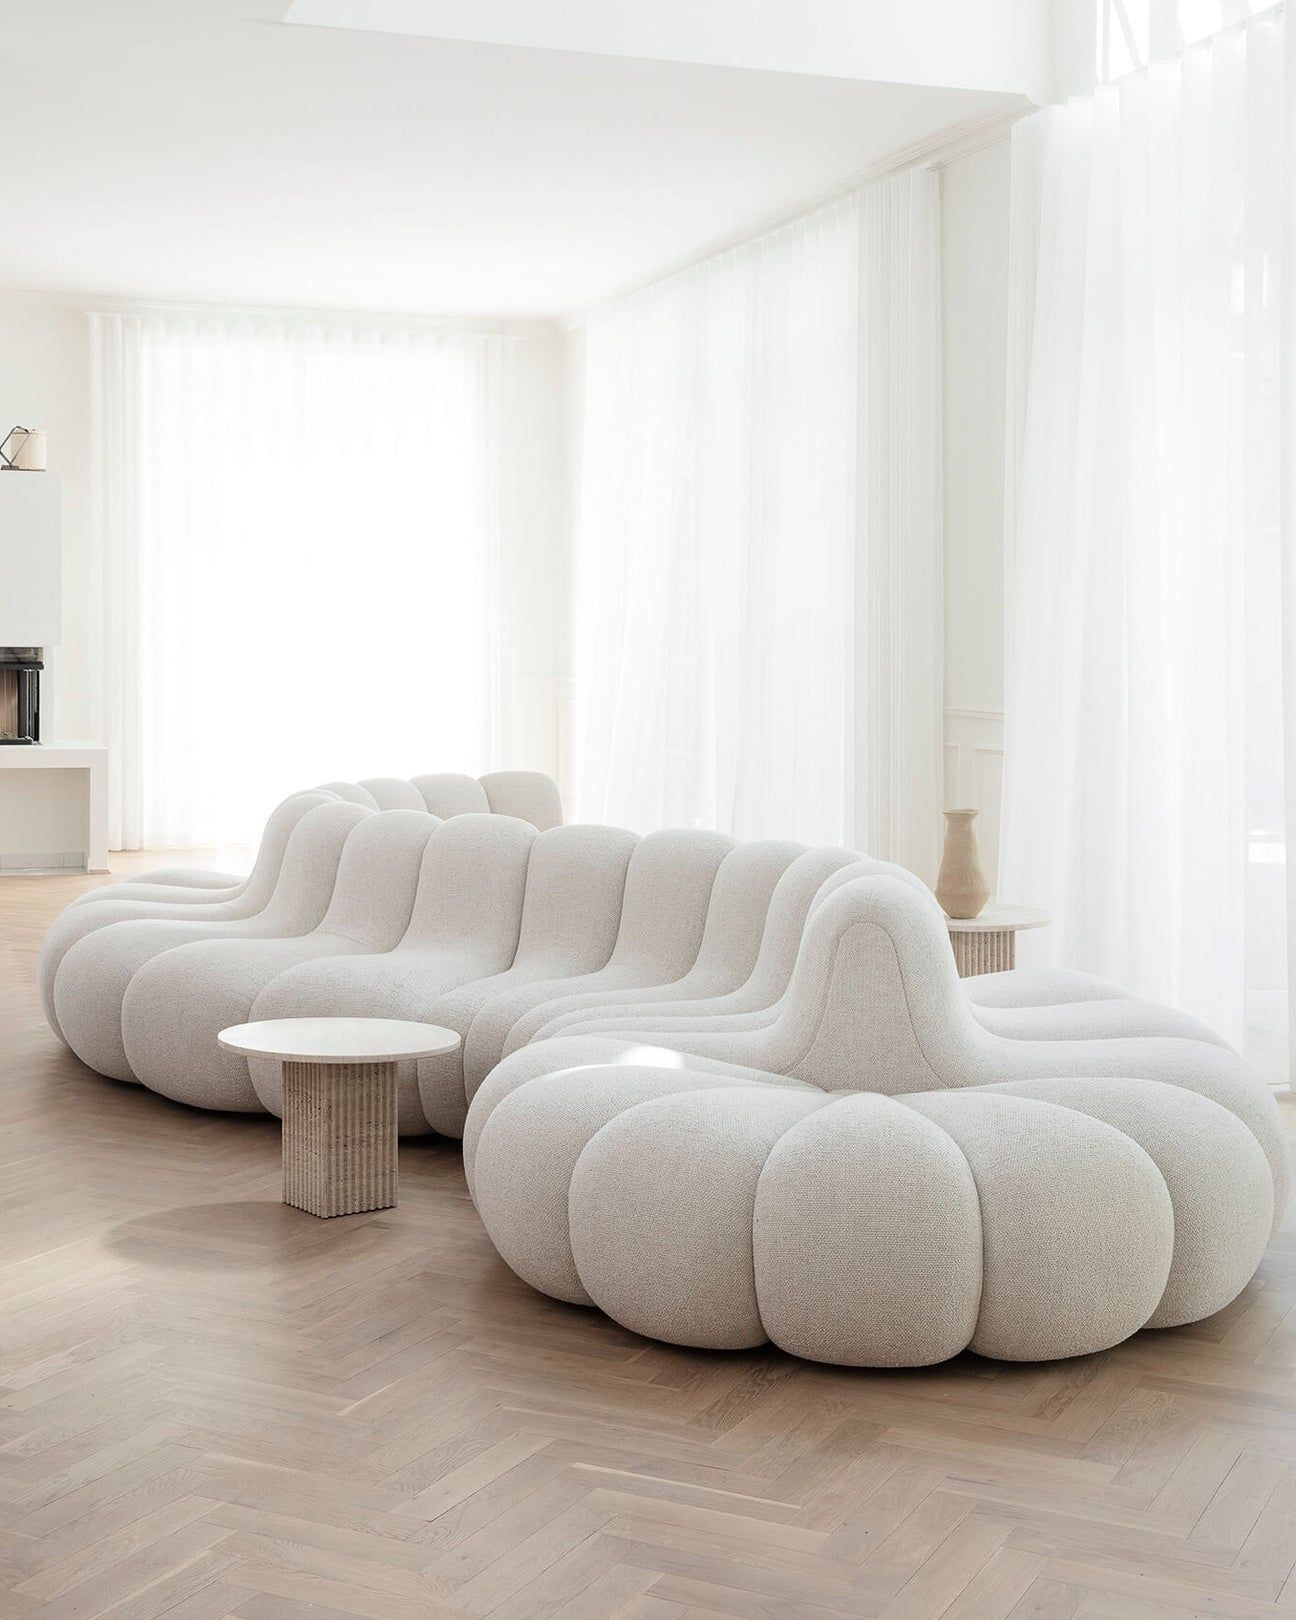 Buy luxury furniture to get a new look of
  your room